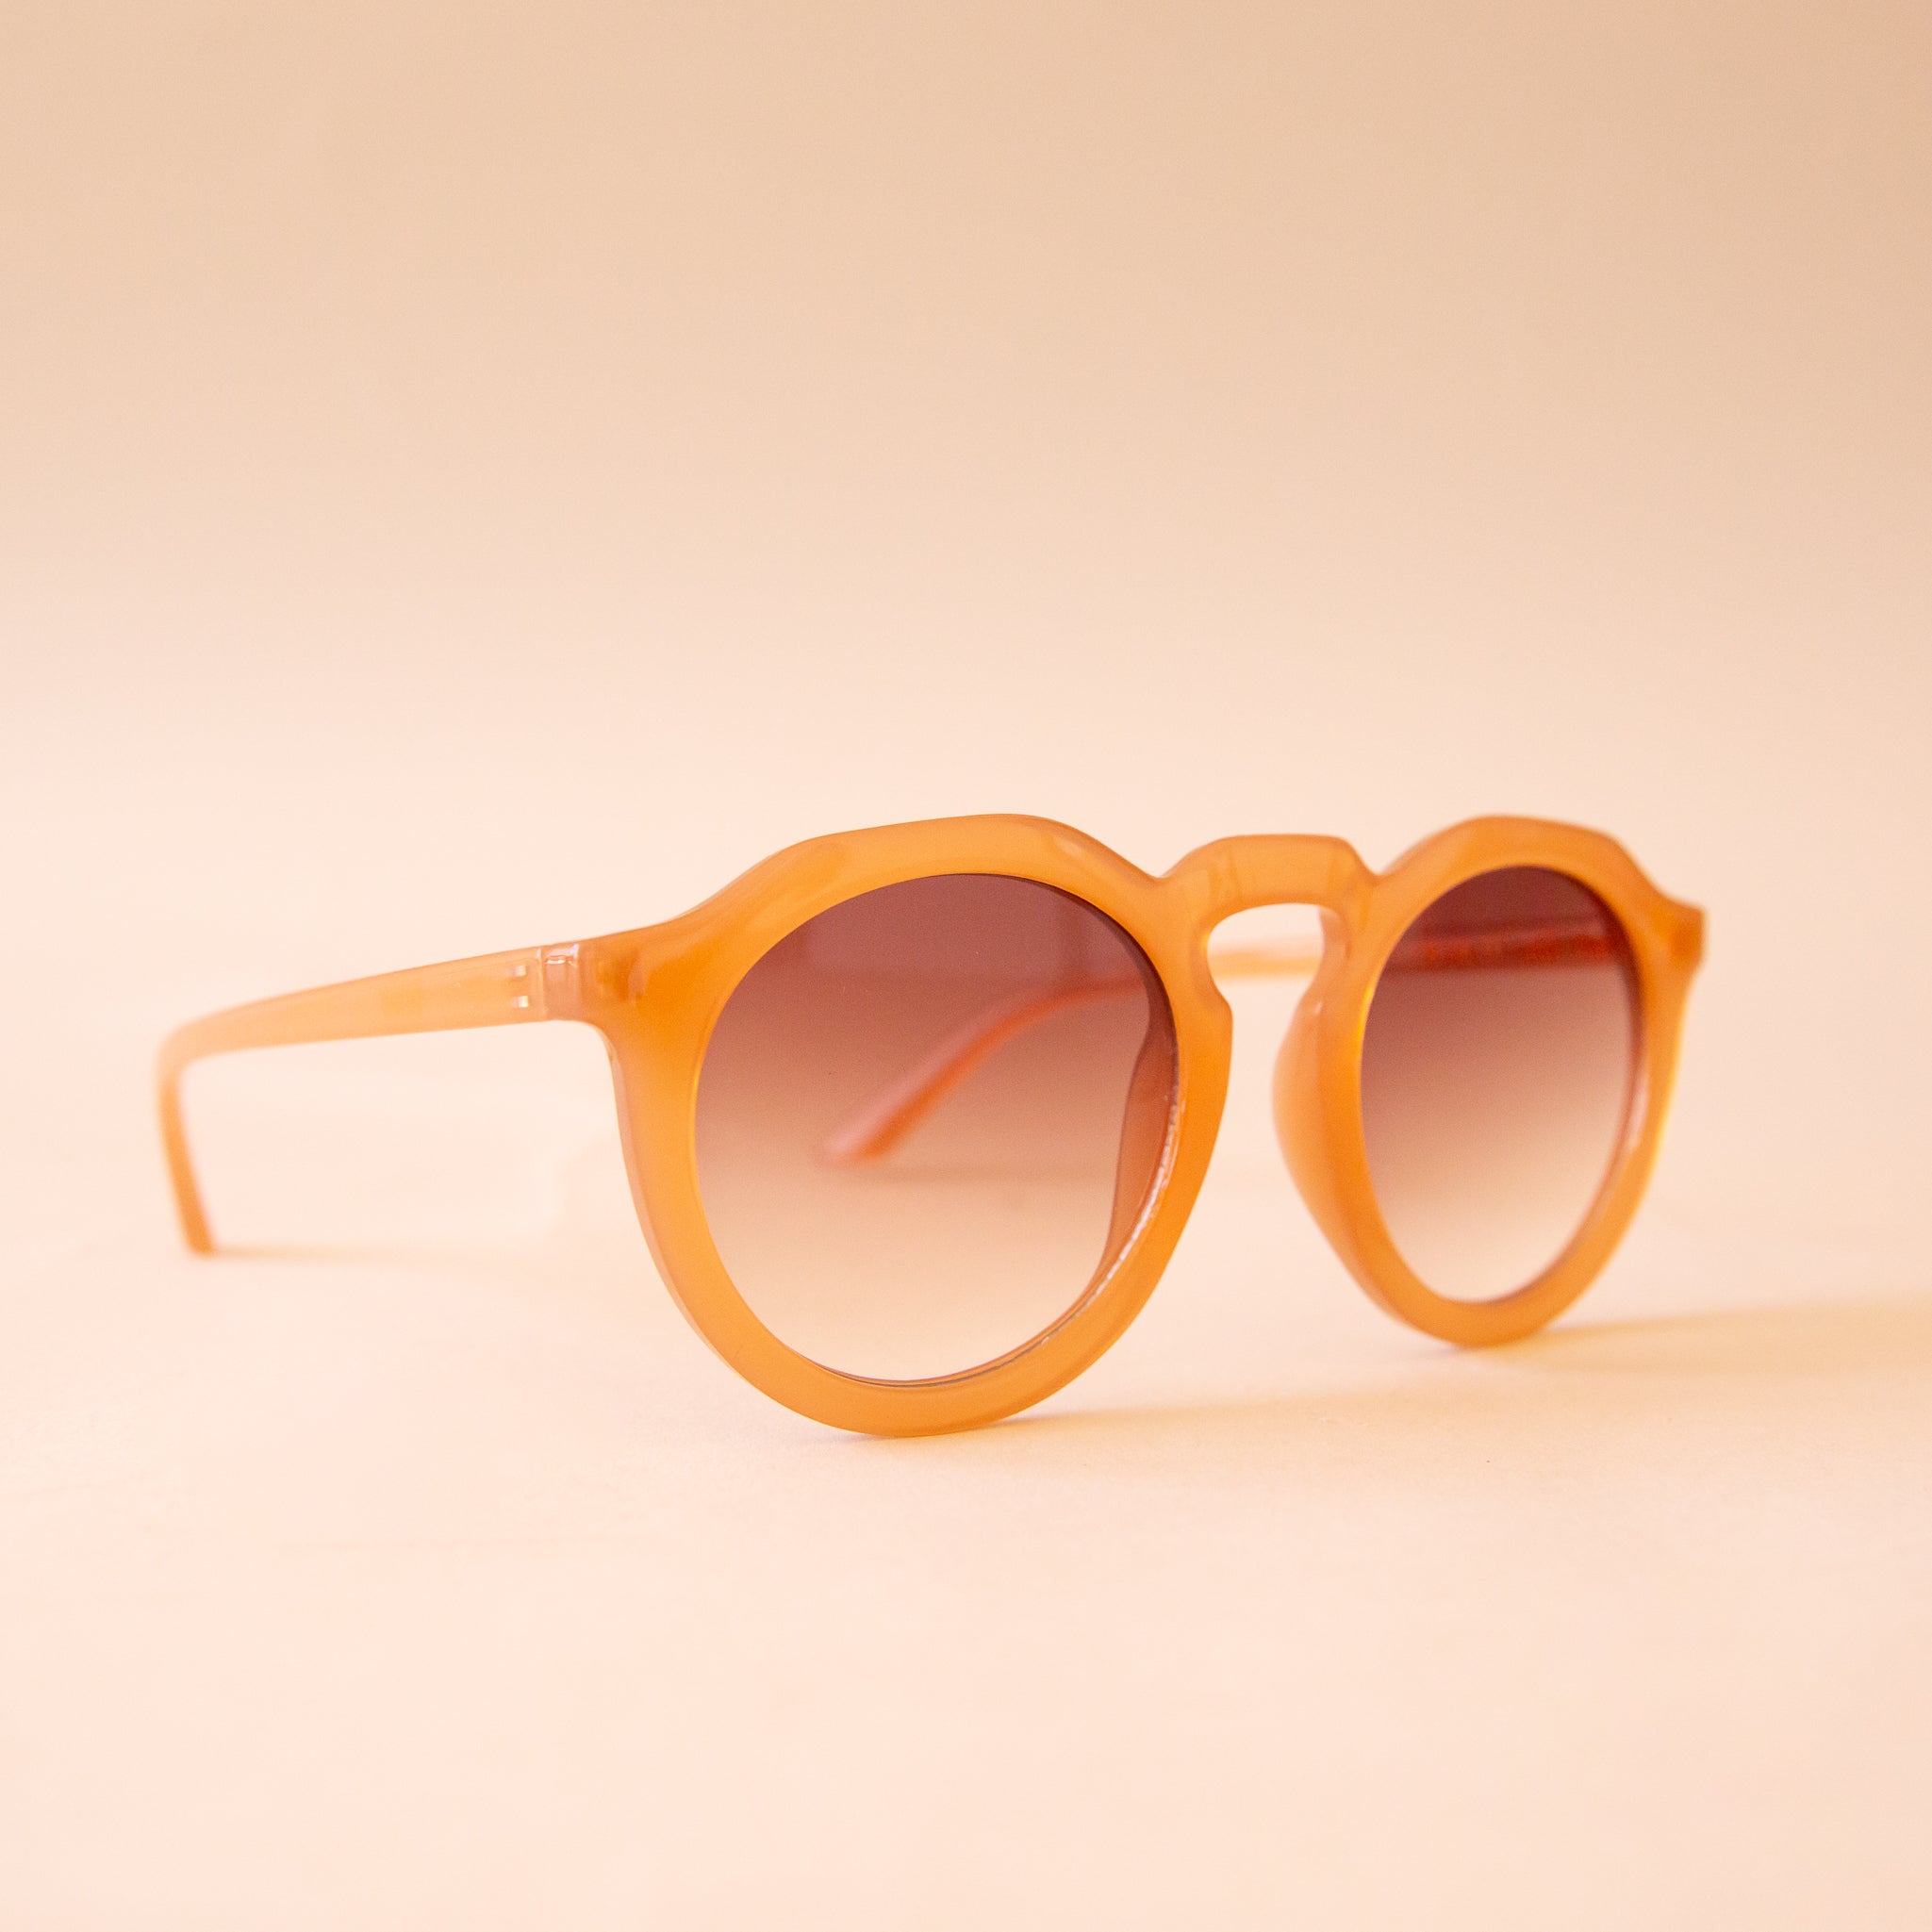 A warm brown pair of round sunglasses with a brown gradient lens.